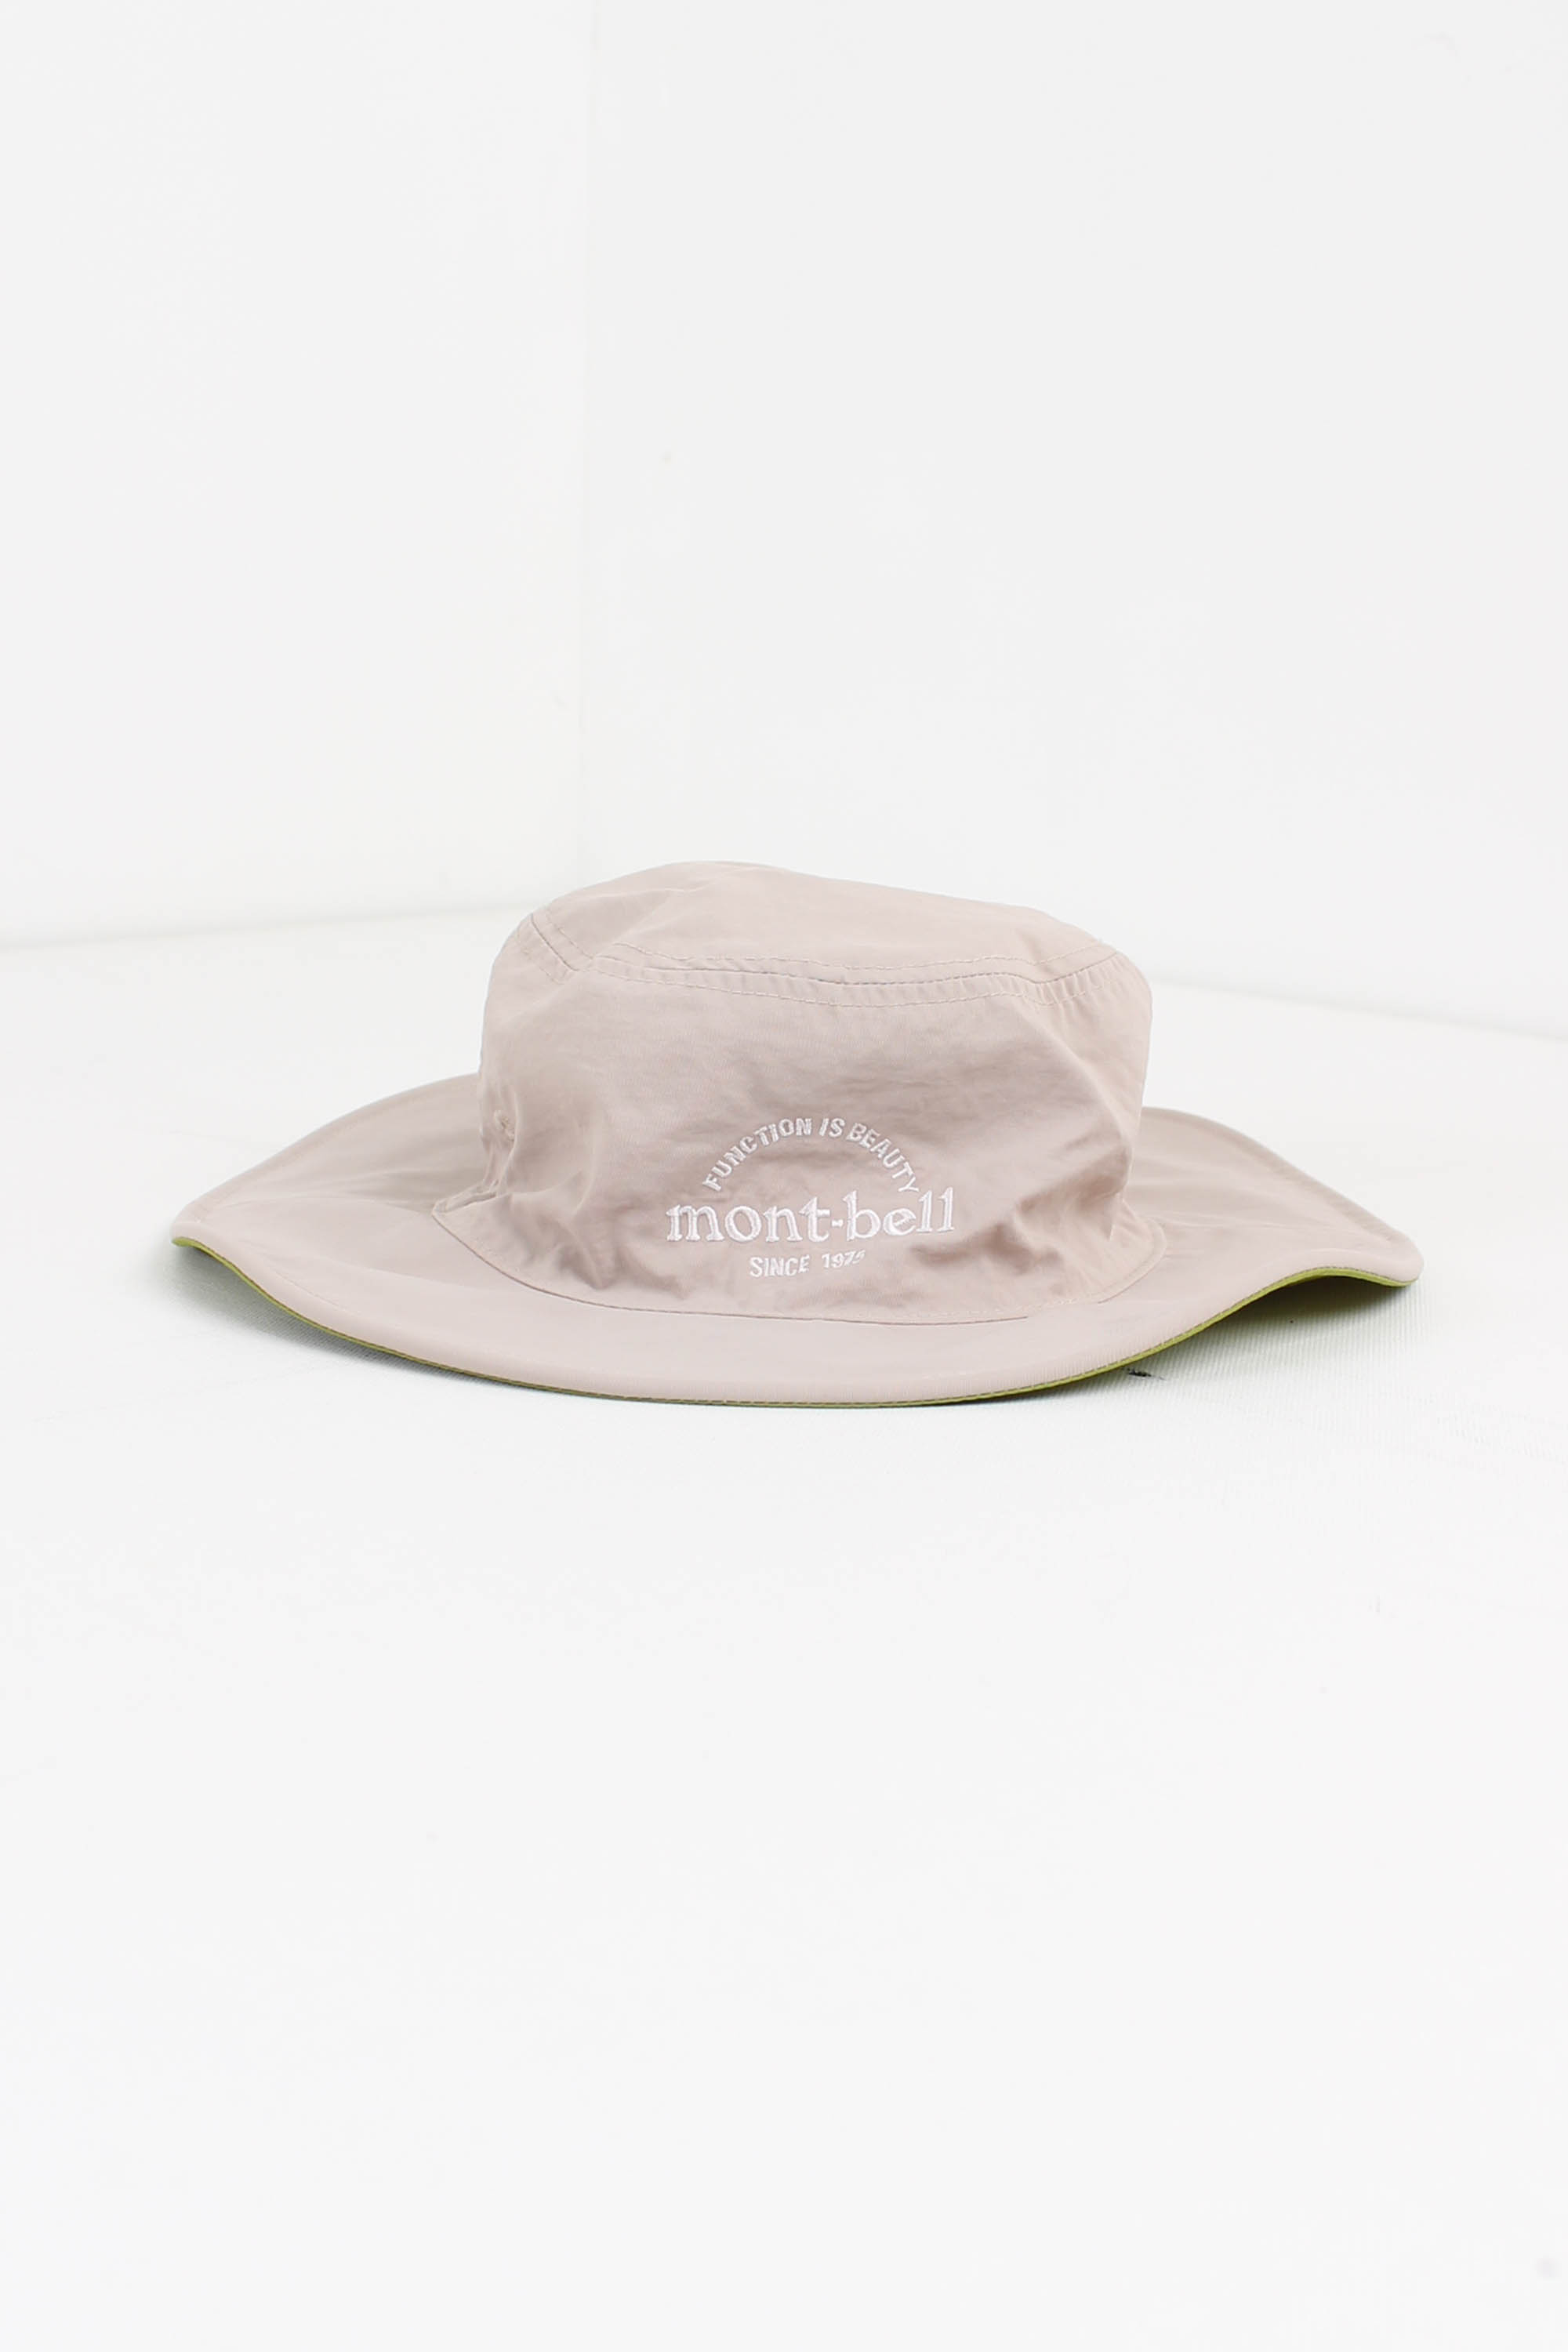 mont bell mountain hat